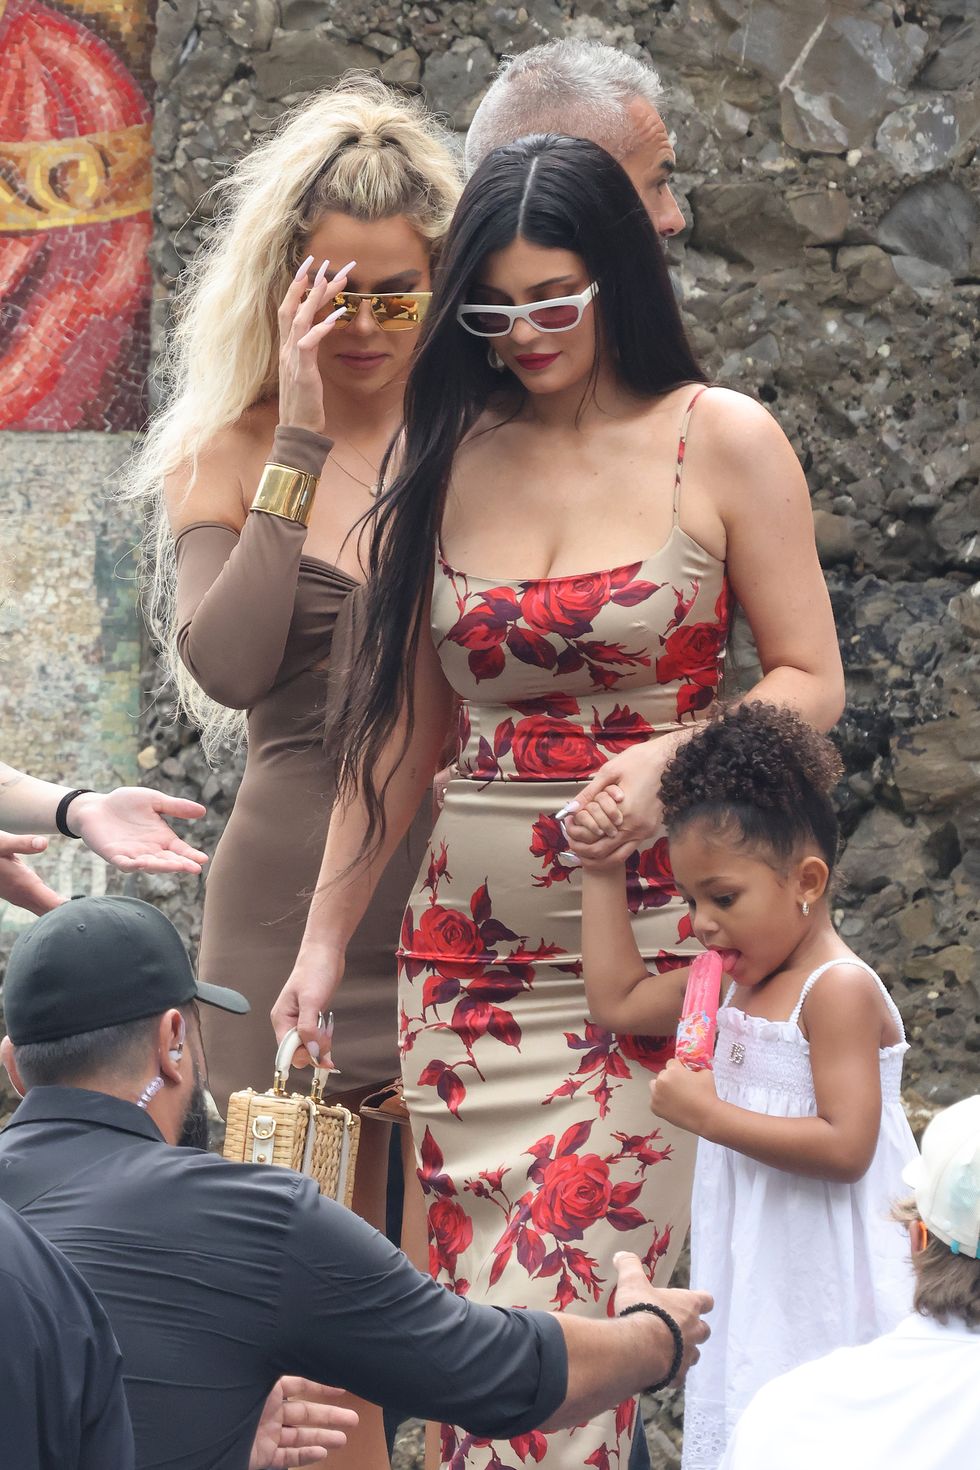 Kylie Jenner Paired Her Fiery Red Maxidress With a New Set of